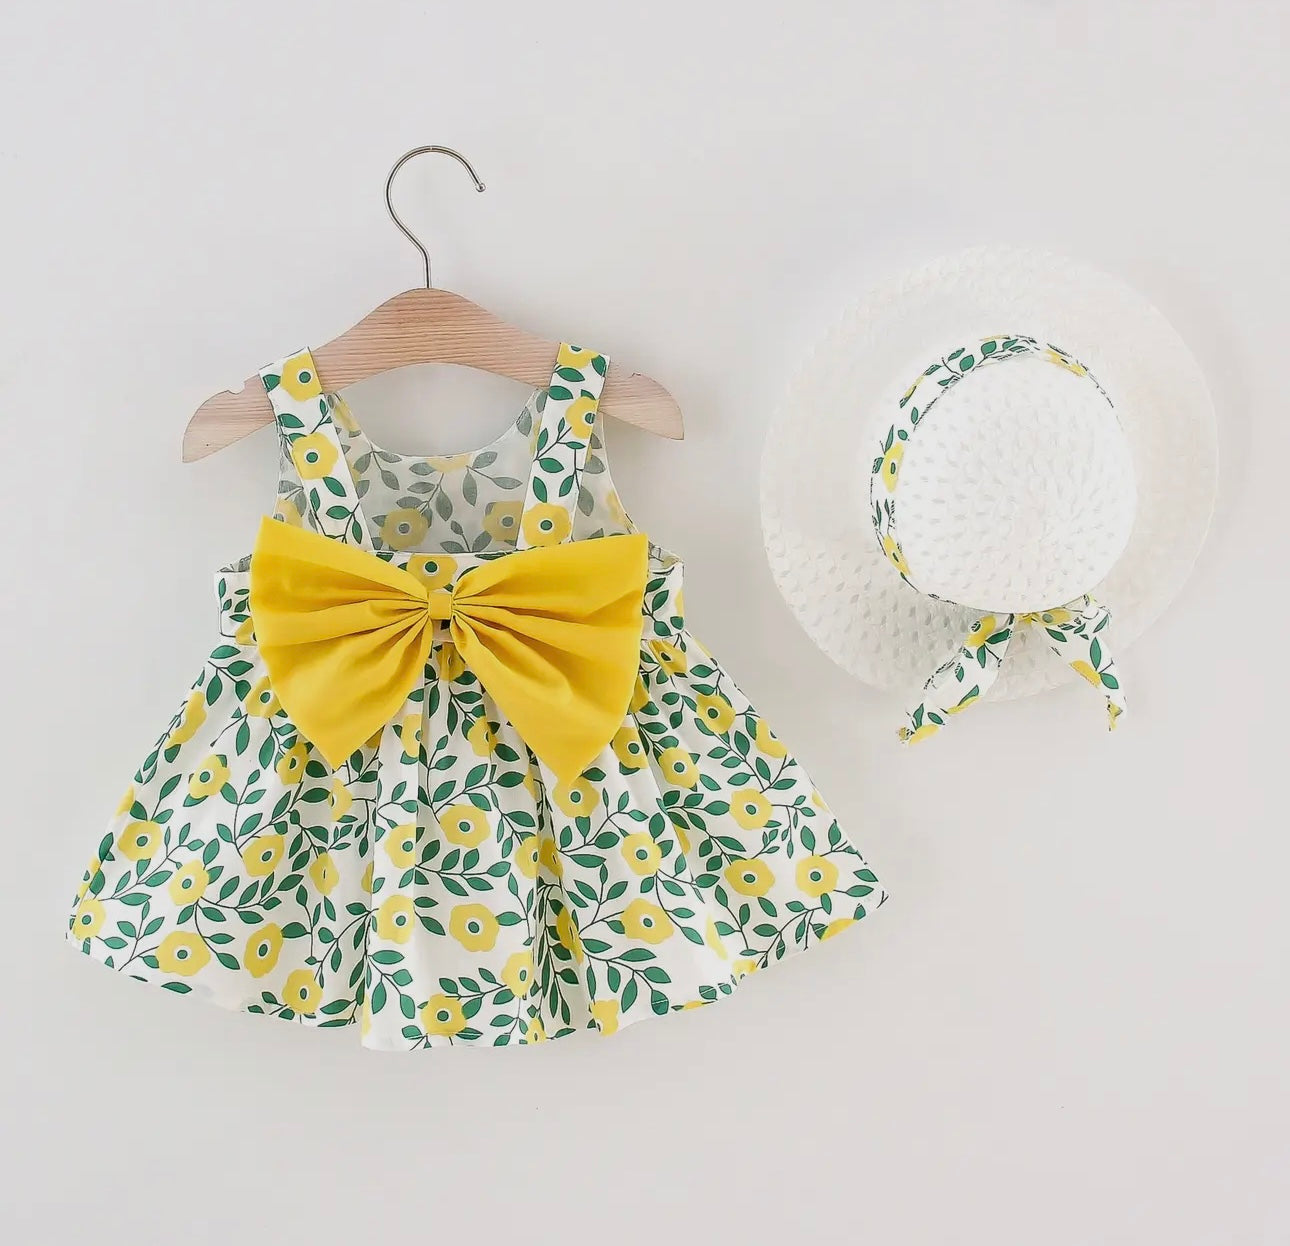 2 piece yellow dress and hat set